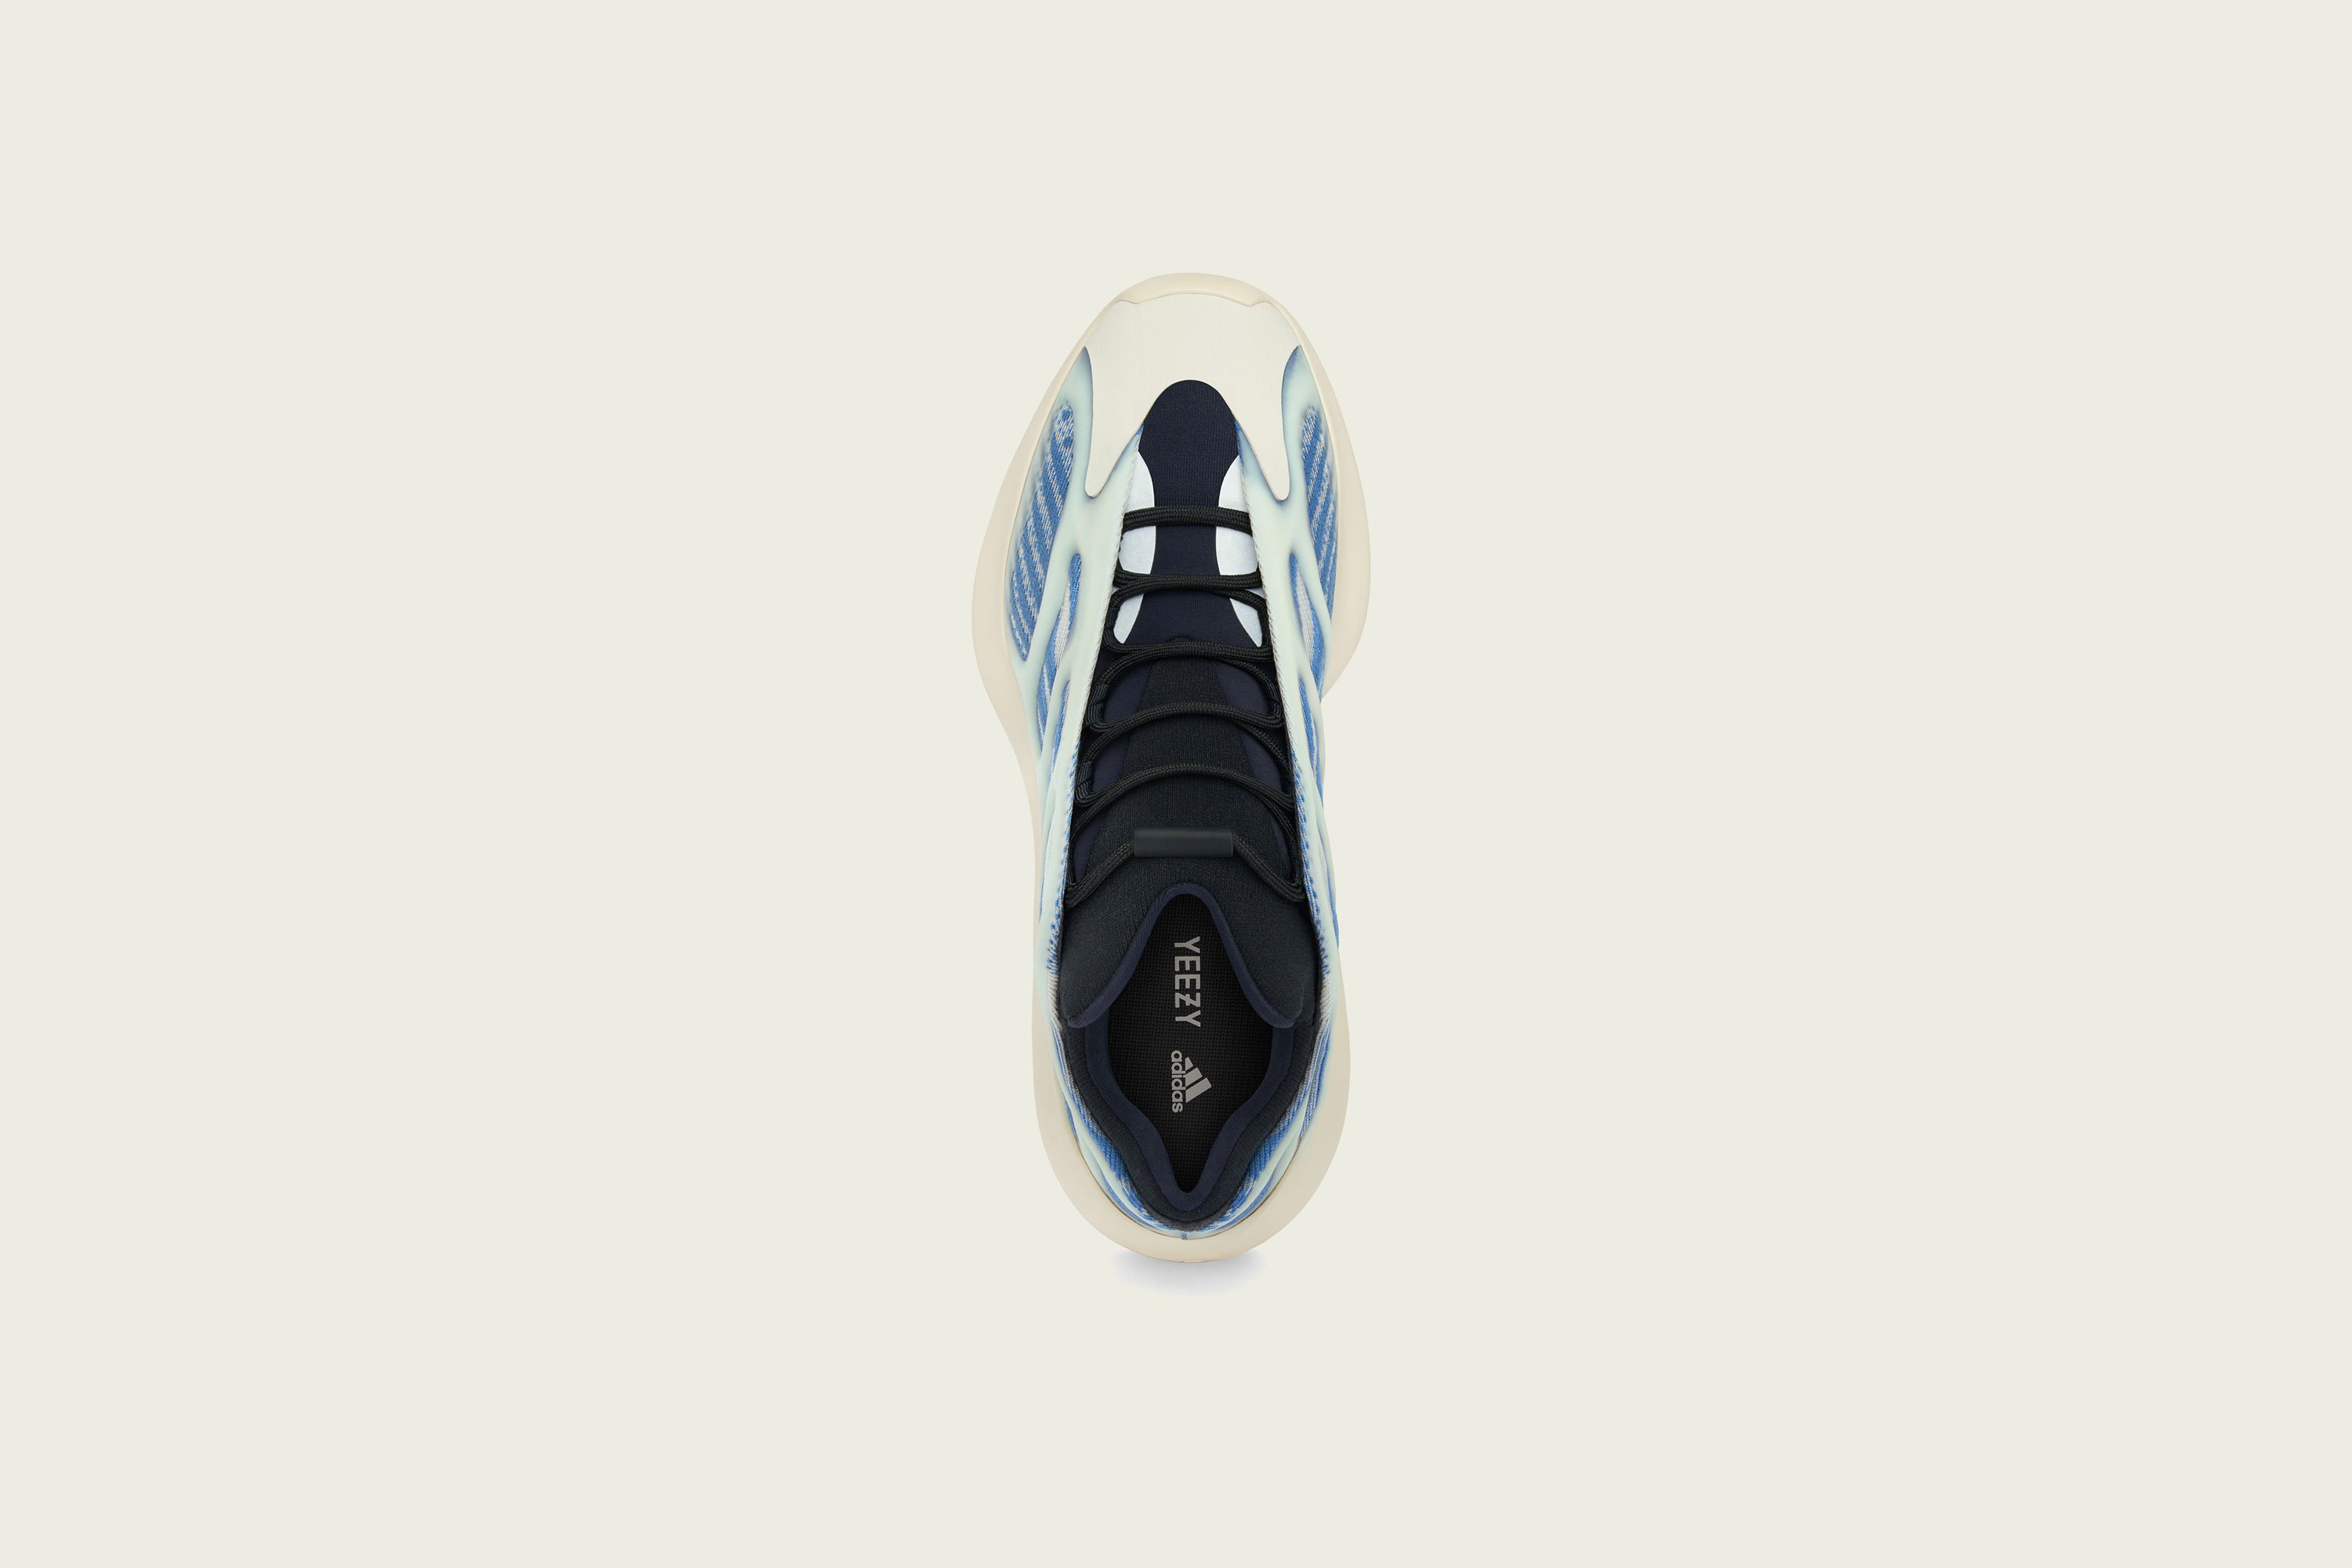 Up There Launches - adidas Originals Yeezy 700v3 - Kyanite